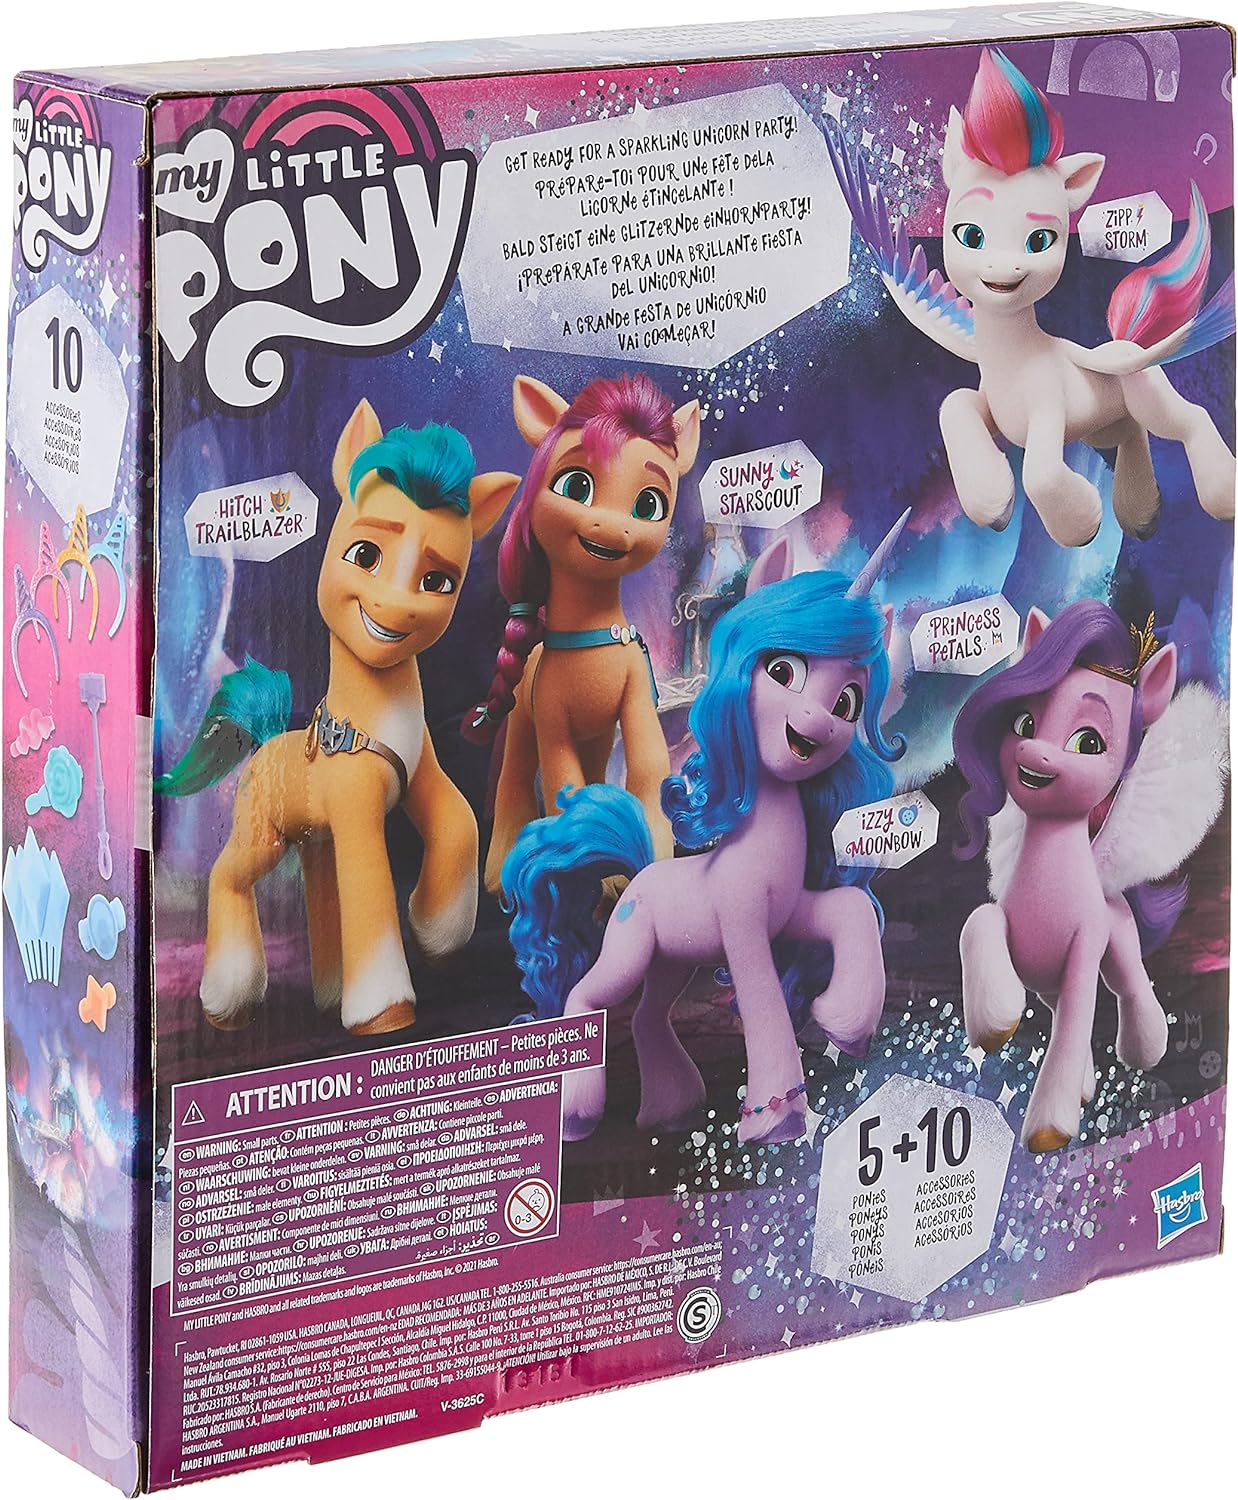 MLP: ANG Mane 5 Unicorn Party Celebration Collection Figure Pack 2